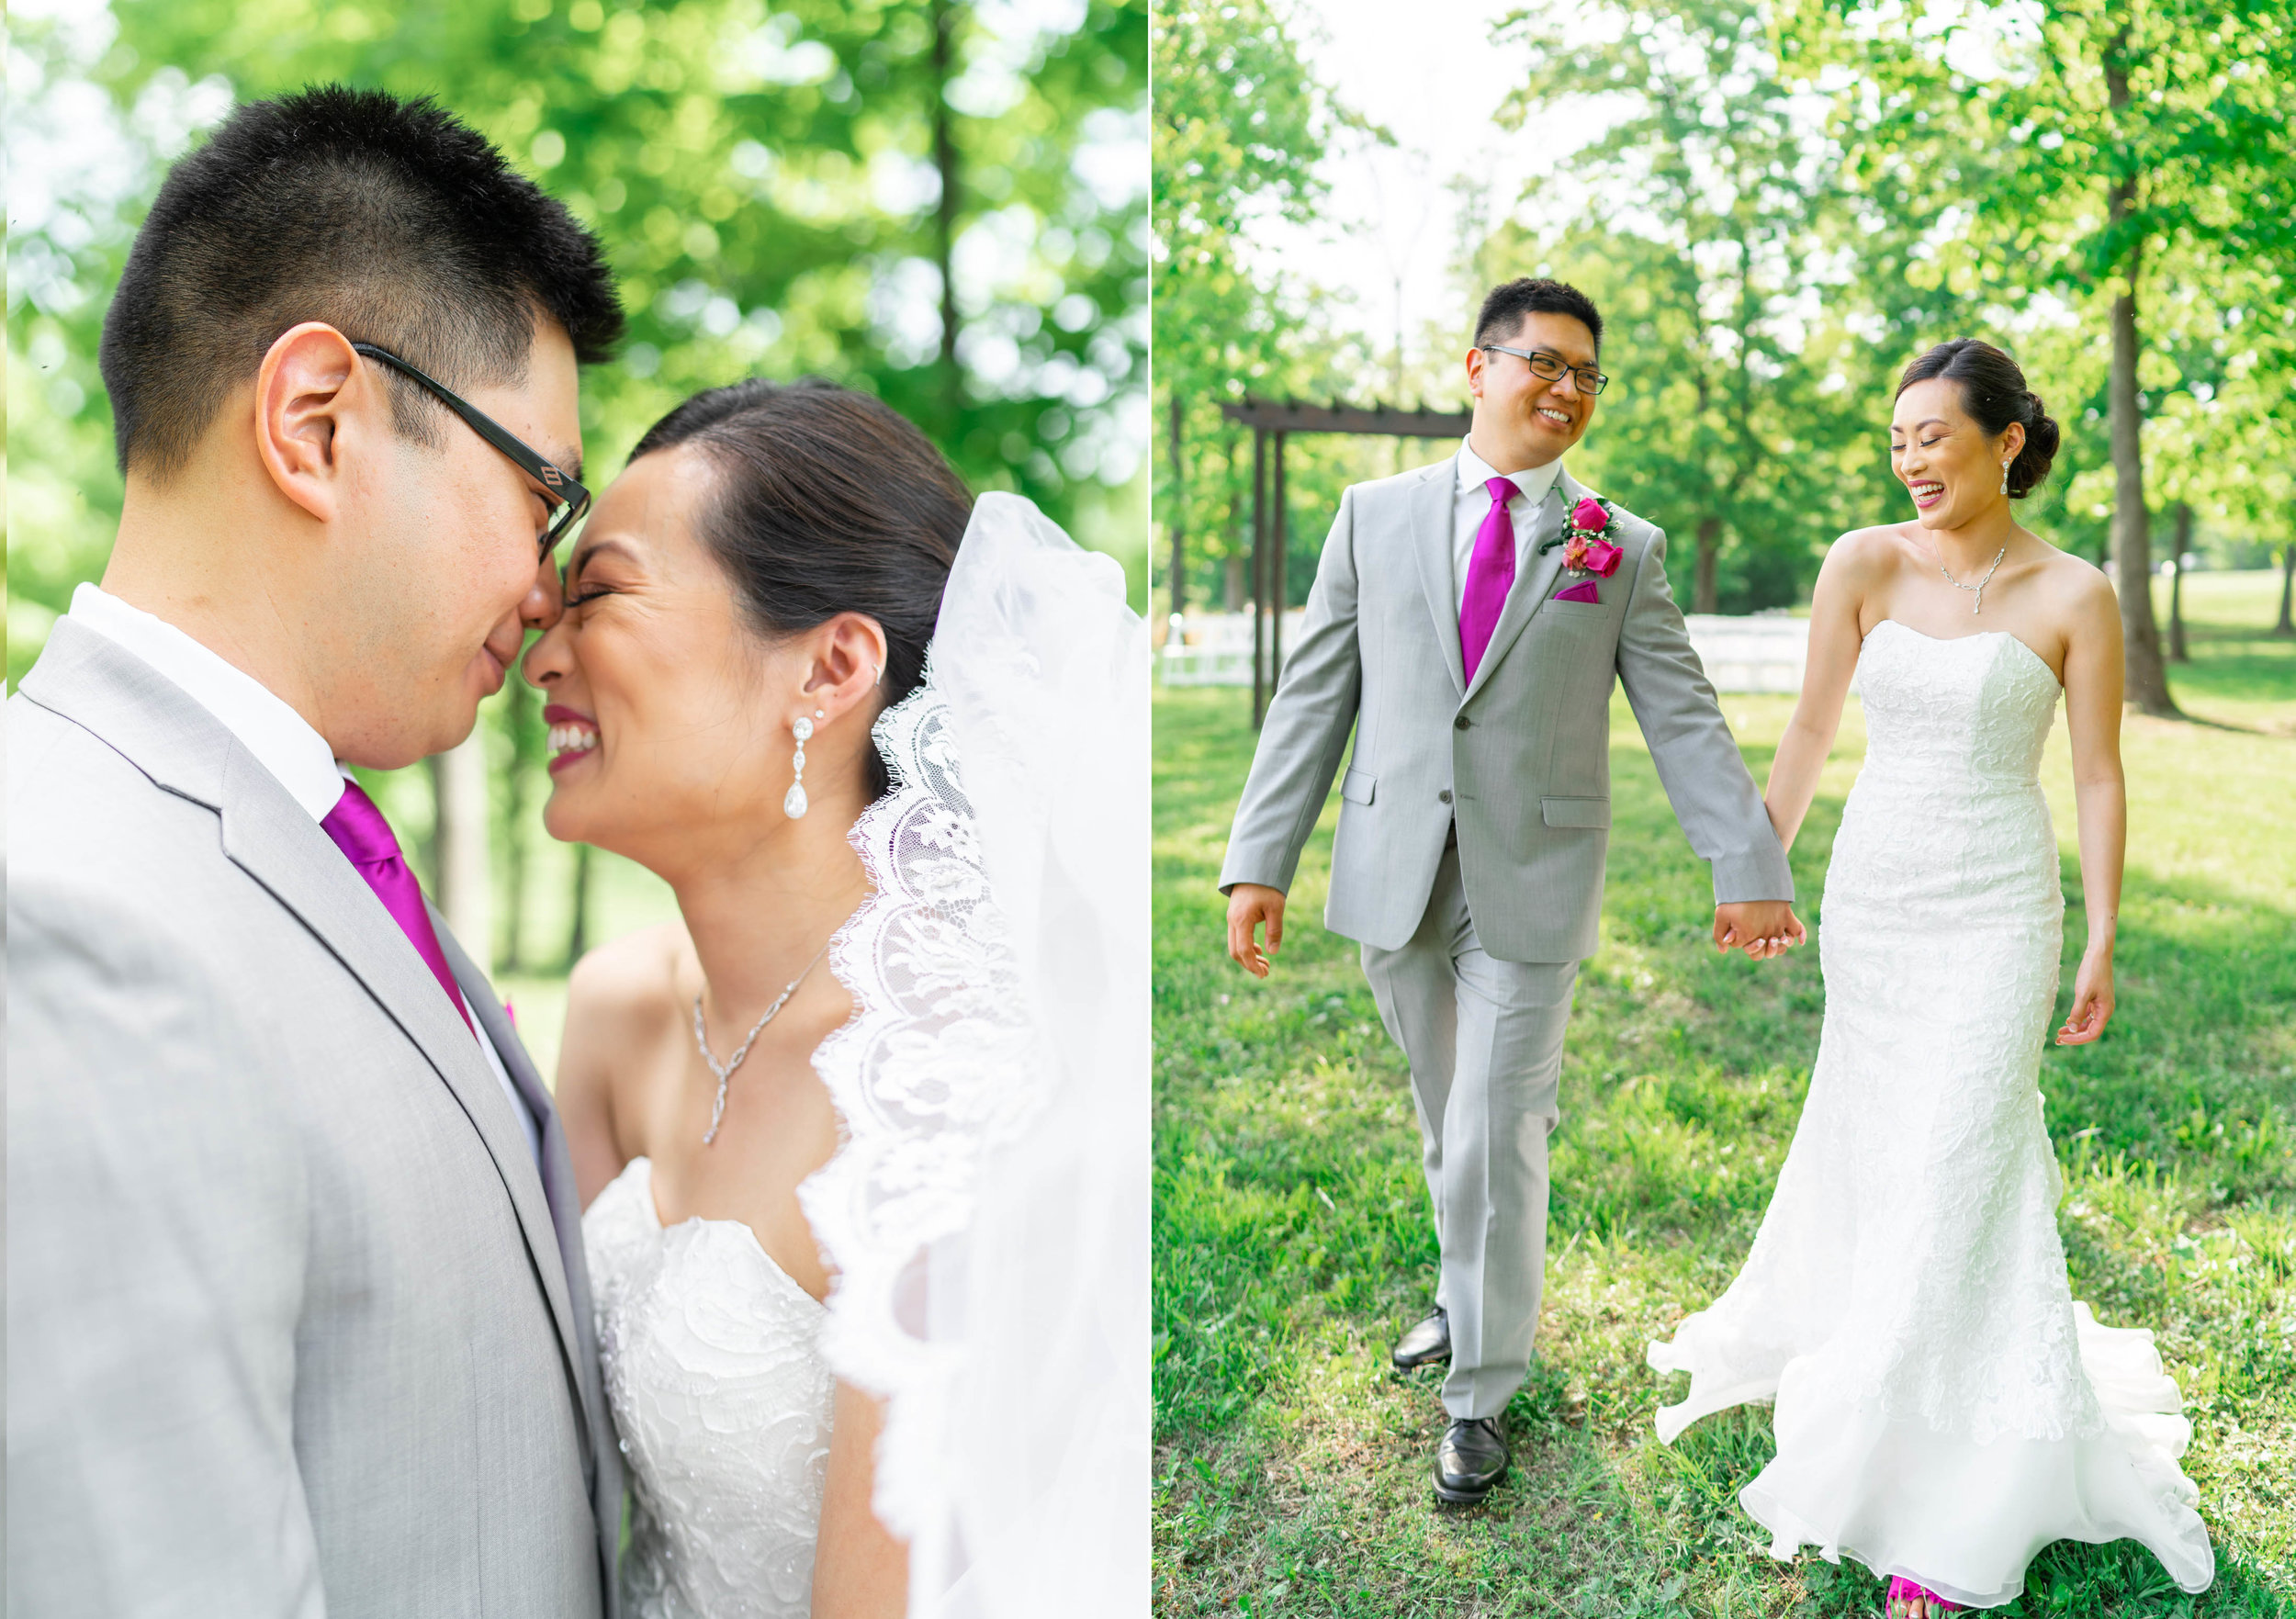 Sony 35mm 1.4 Zeiss lens wedding portraits with bride and groom